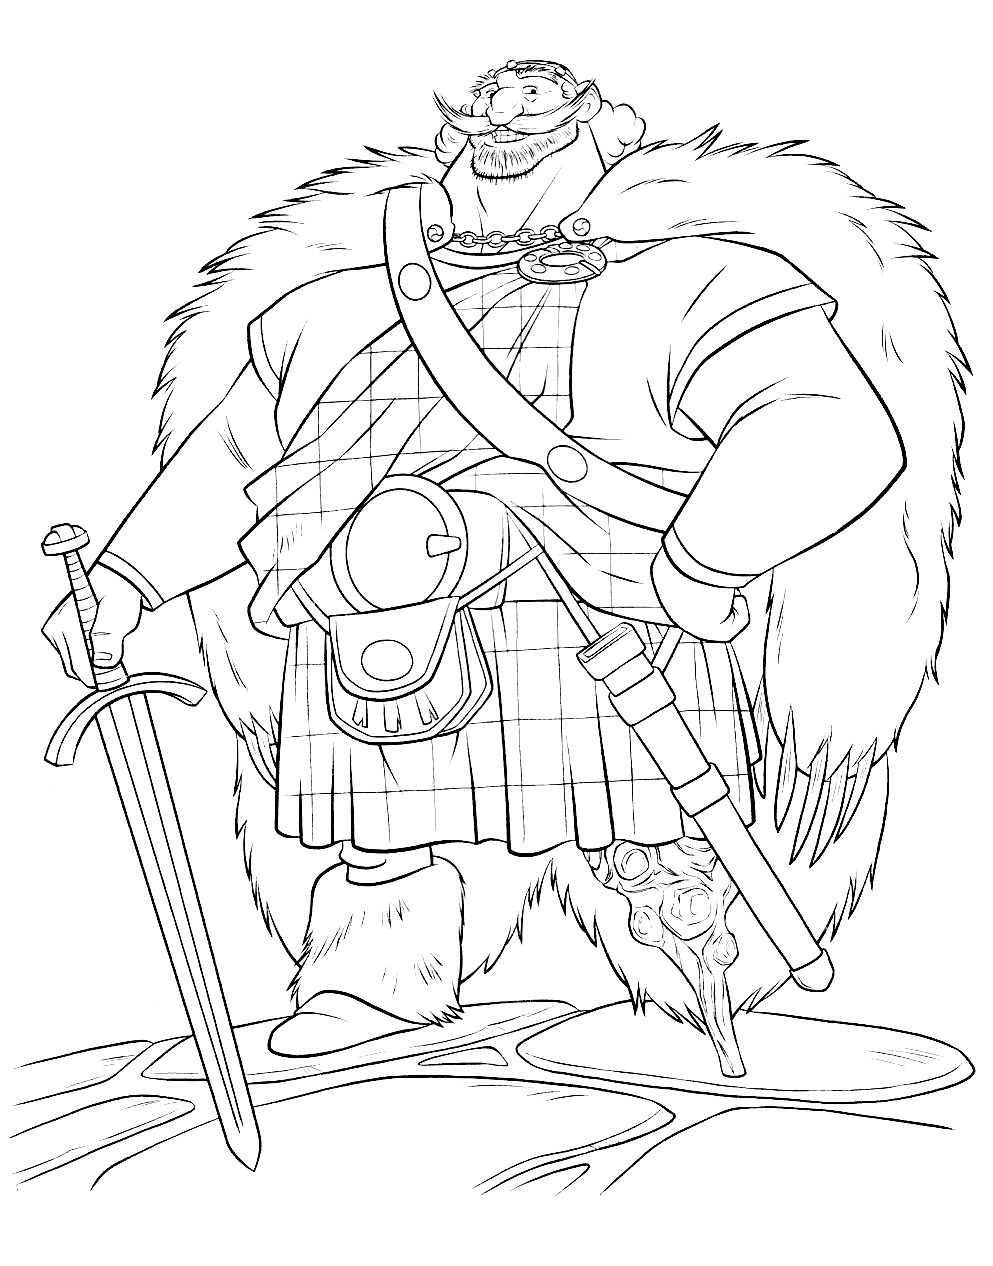 Brave coloring page to download